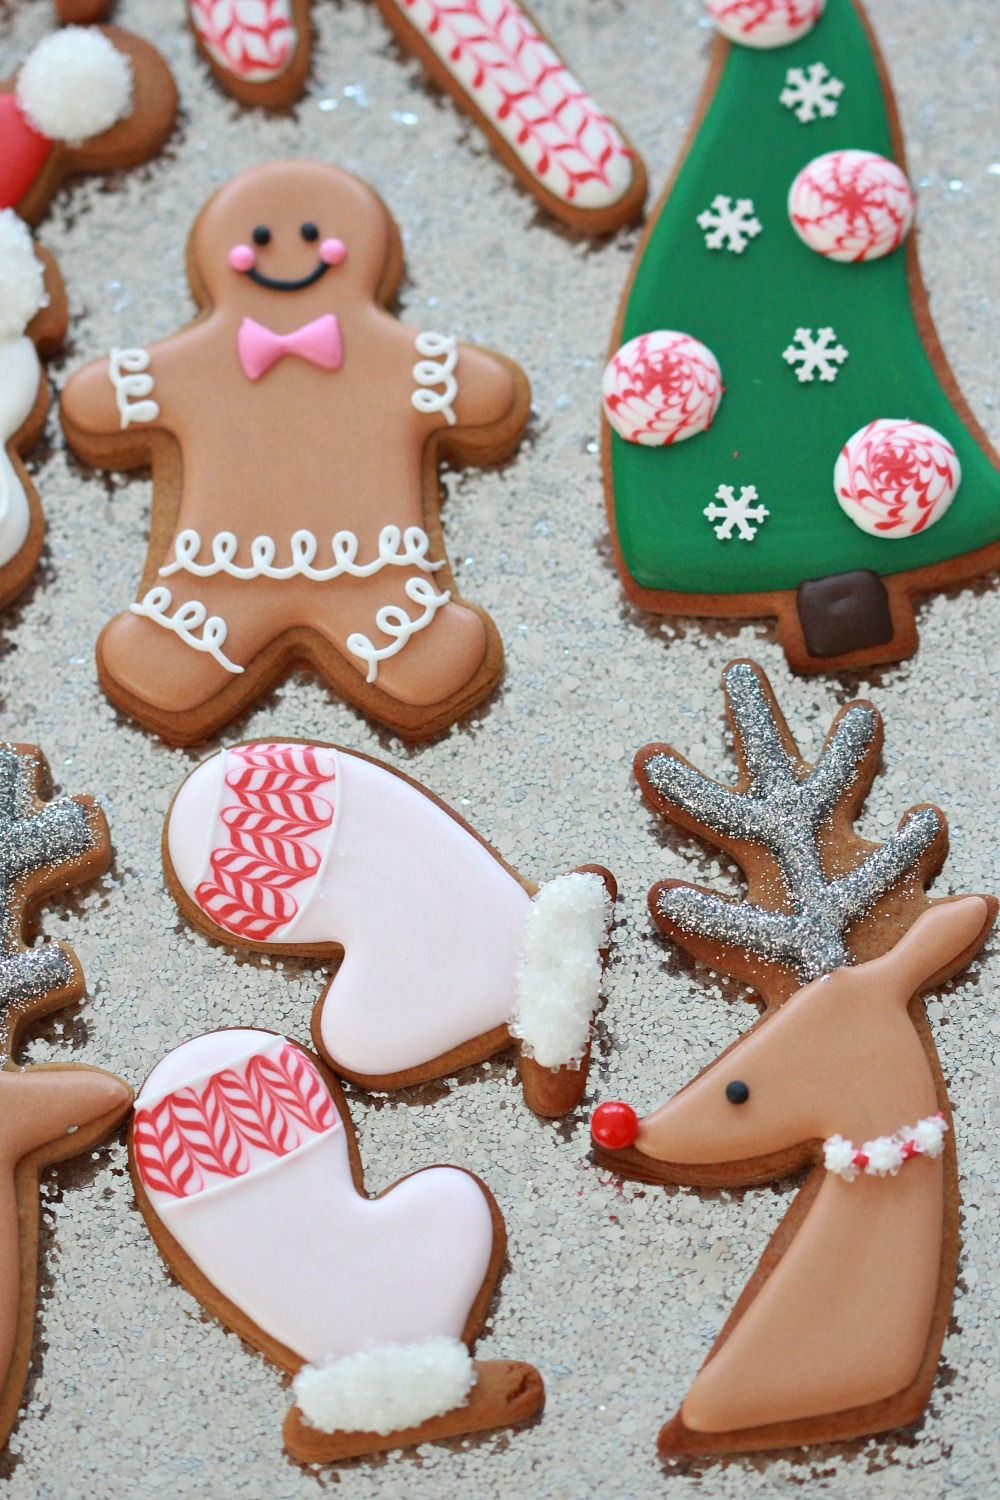 (Video) How to Decorate Christmas Cookies - Simple Designs for Beginners | Sweetopia